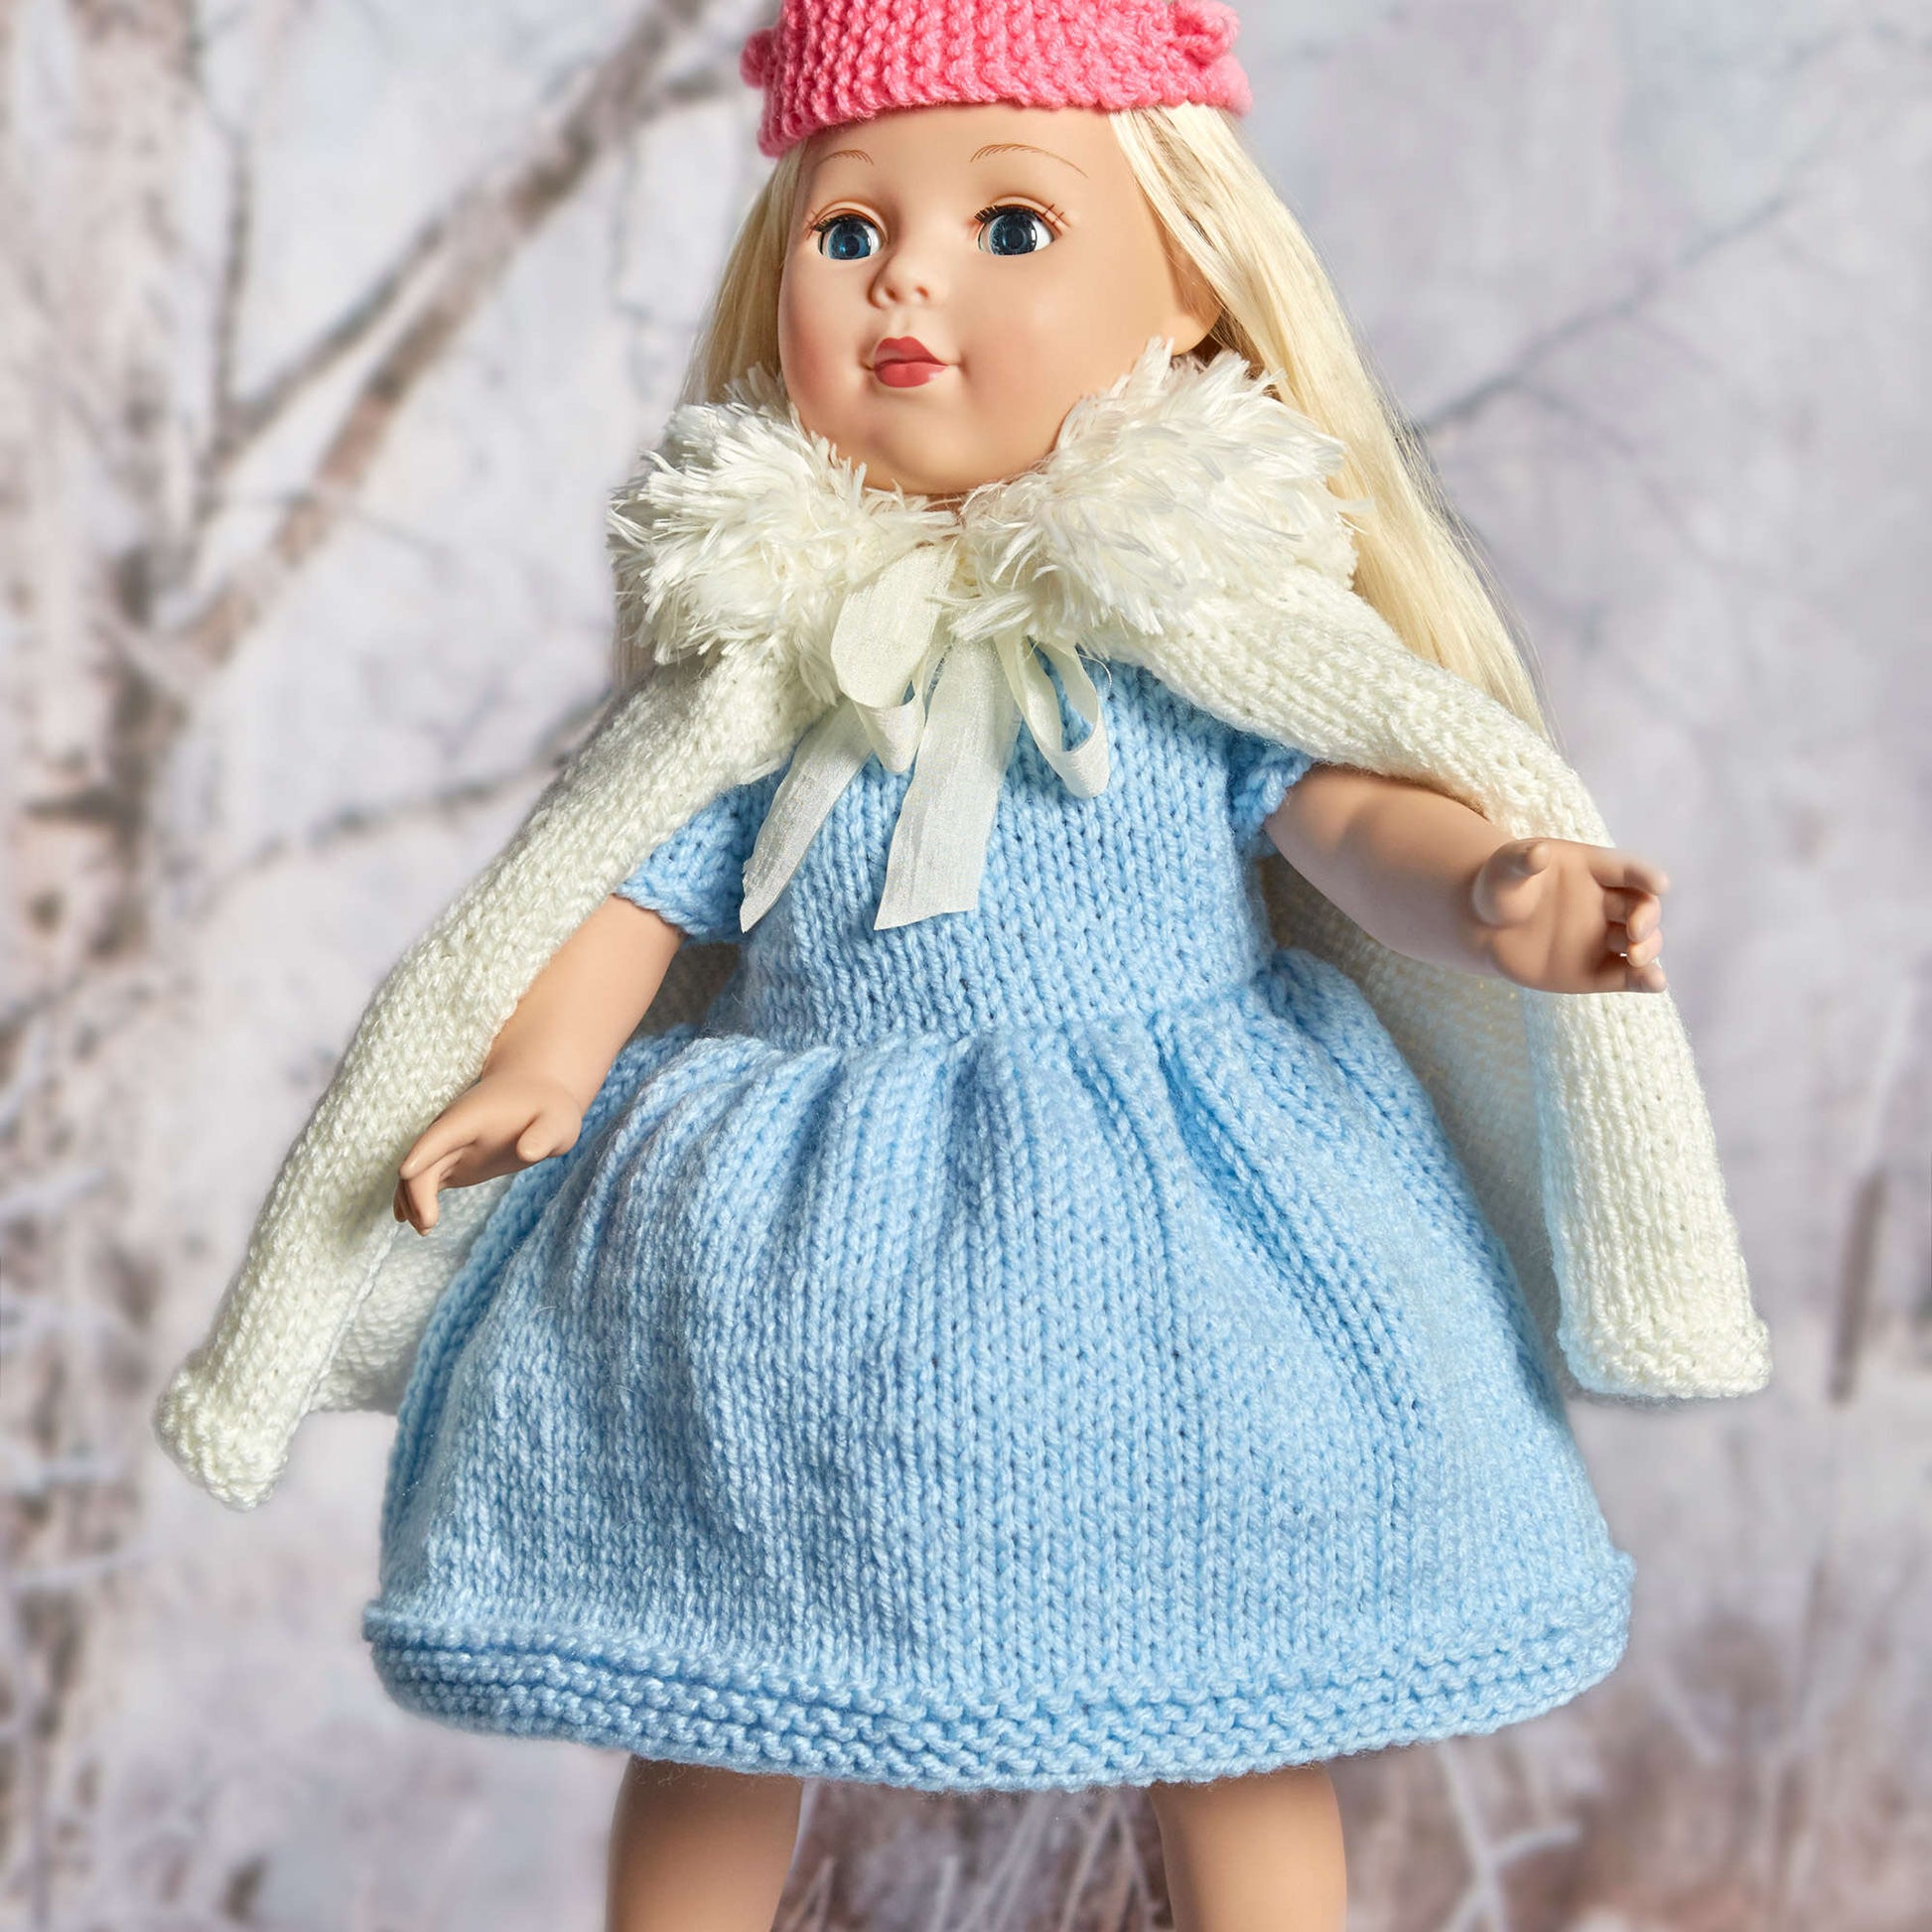 Free Red Heart Knit Royal Princess Doll Outfit Pattern